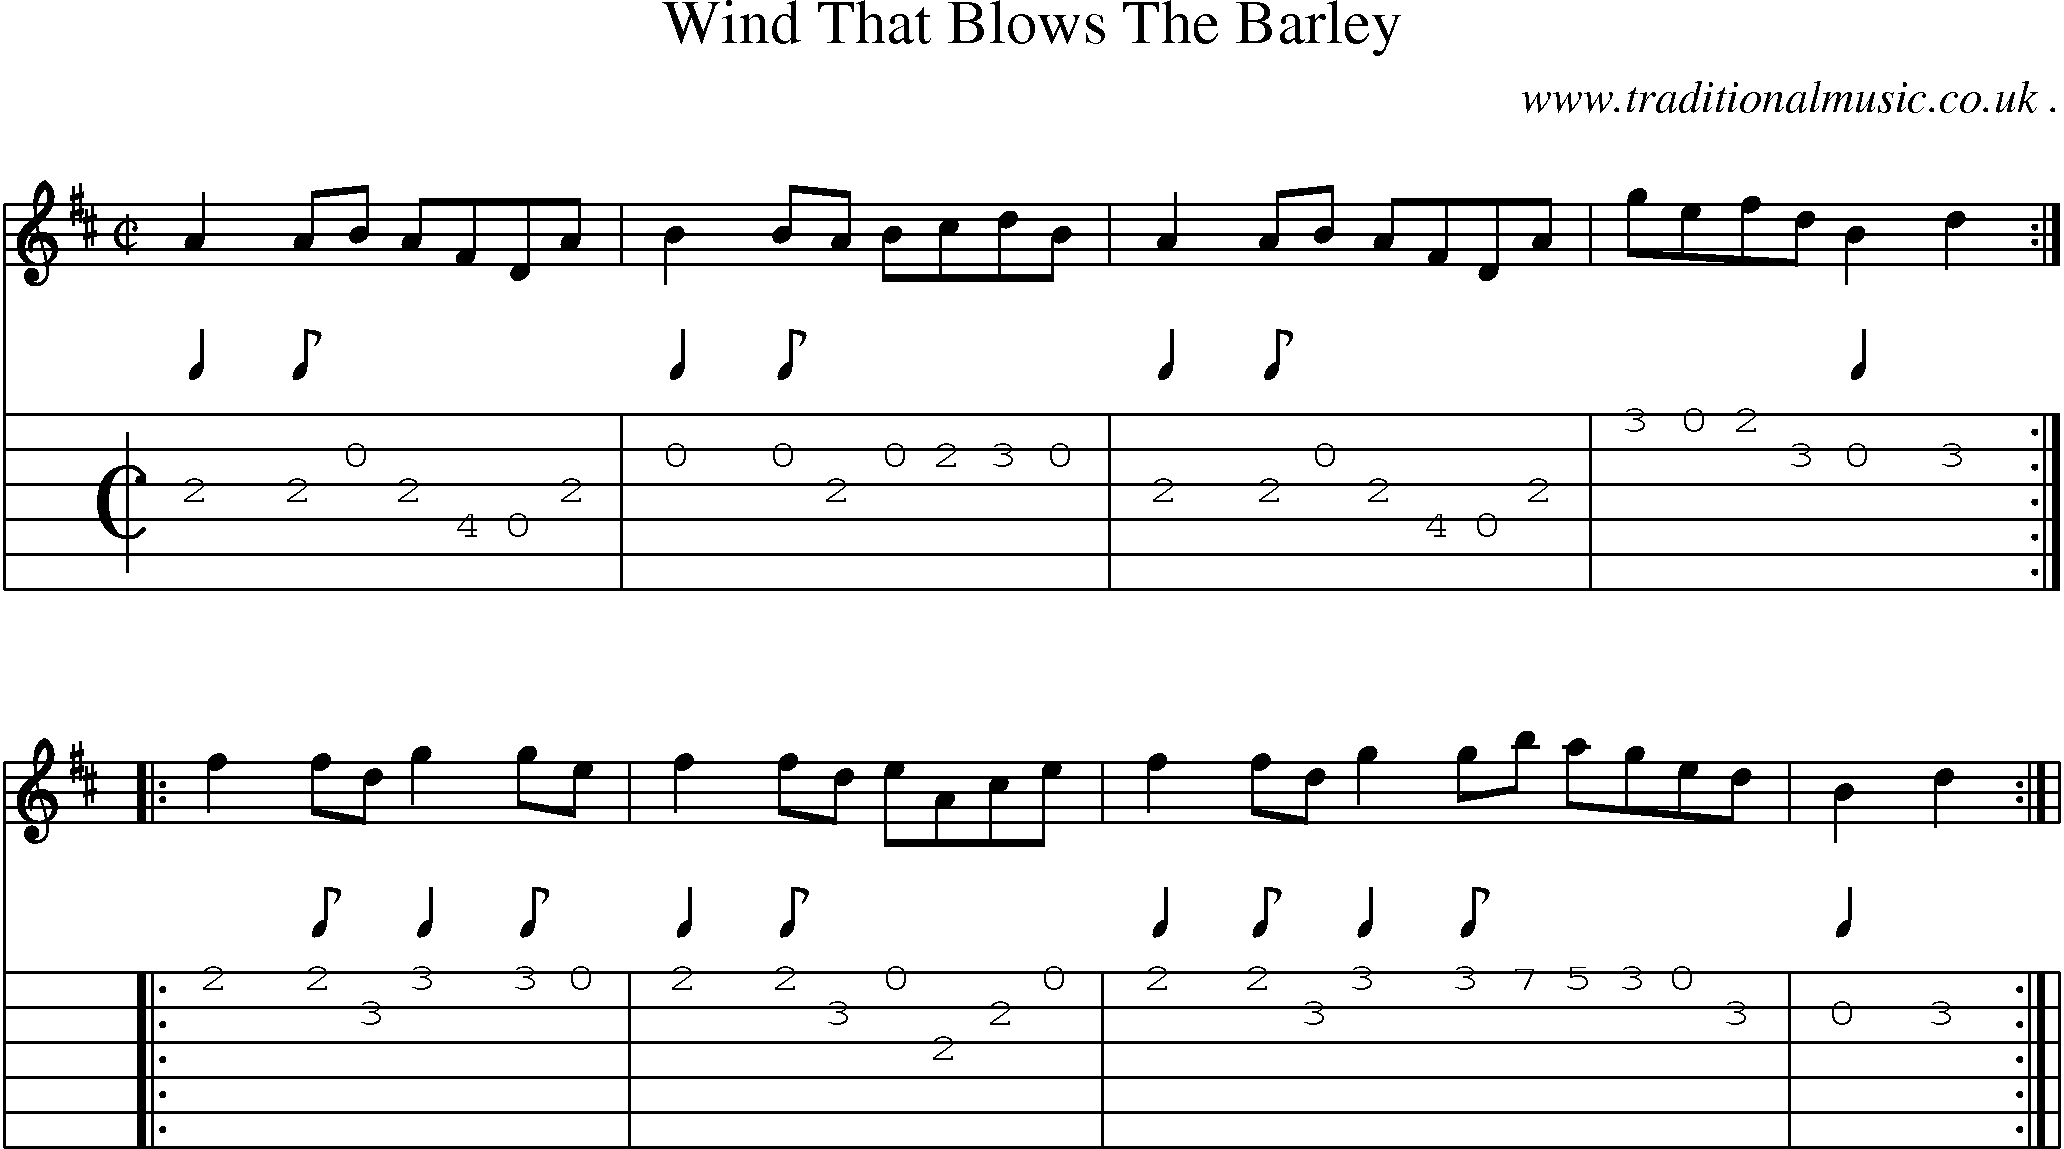 Sheet-Music and Guitar Tabs for Wind That Blows The Barley